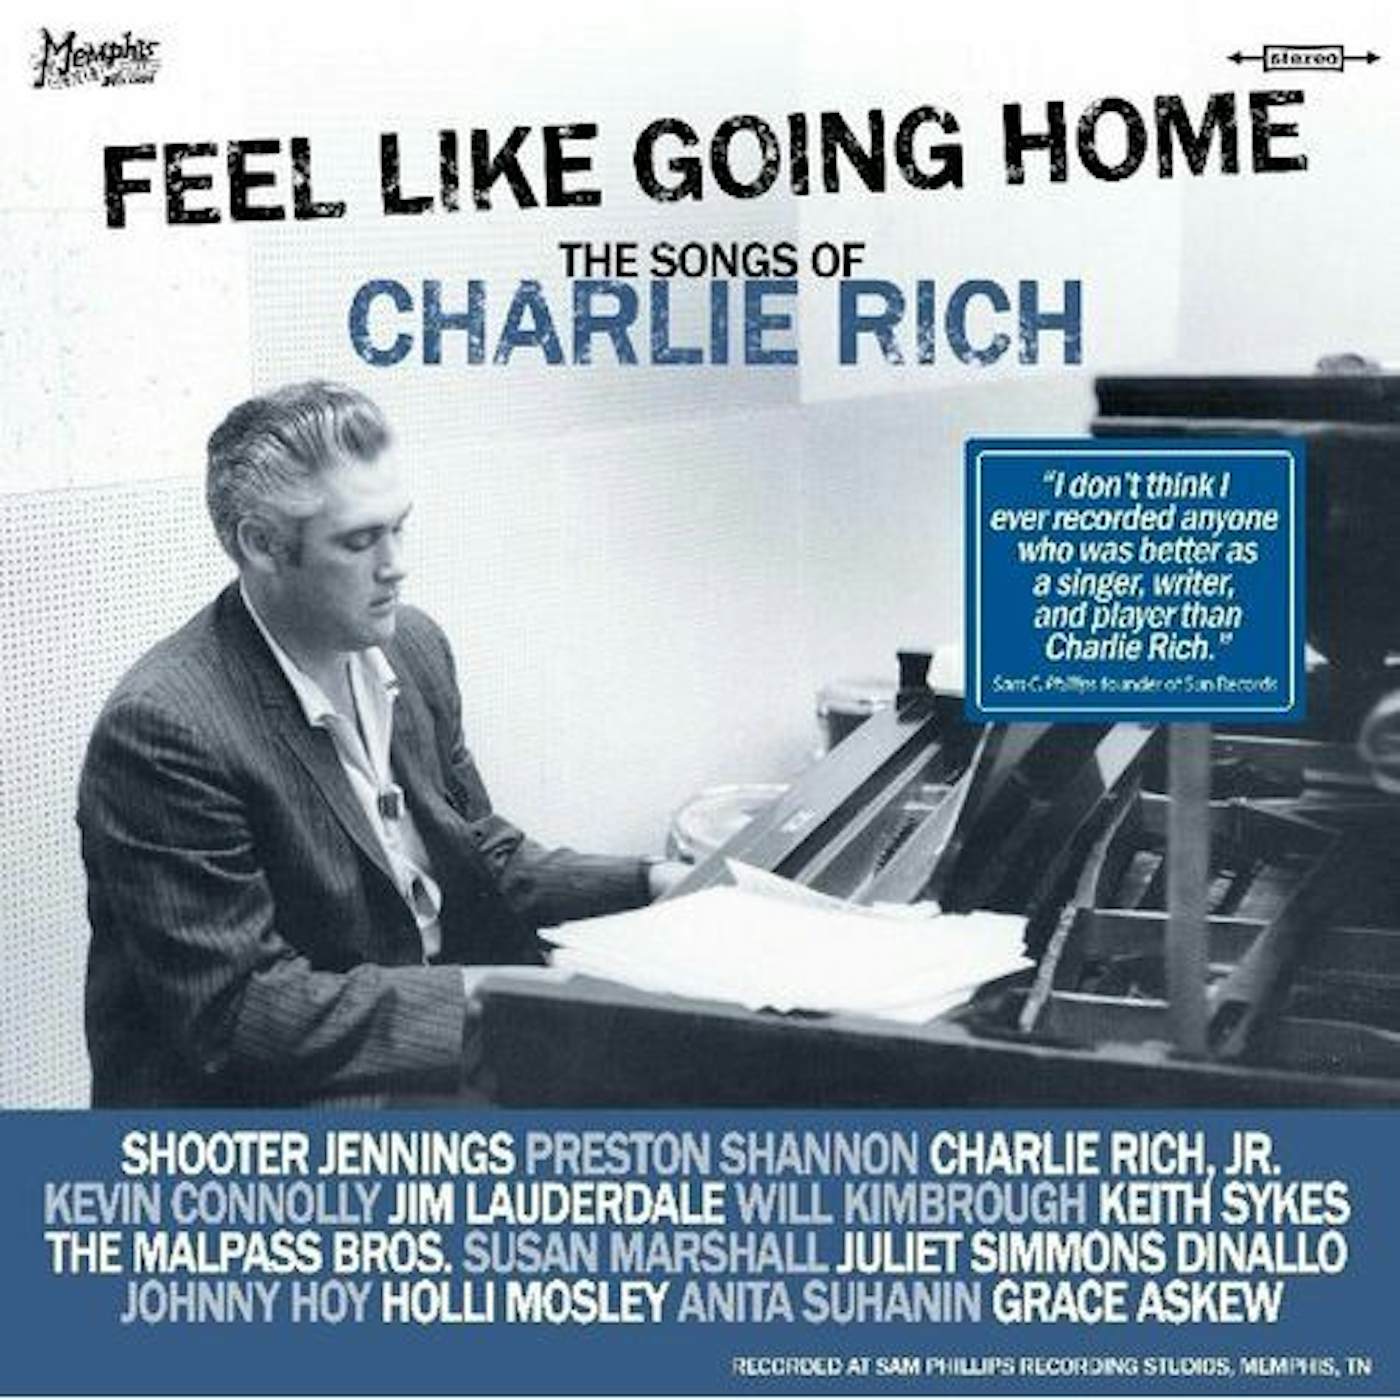 Songs of Charlie Rich: Feels Like Going Home CD